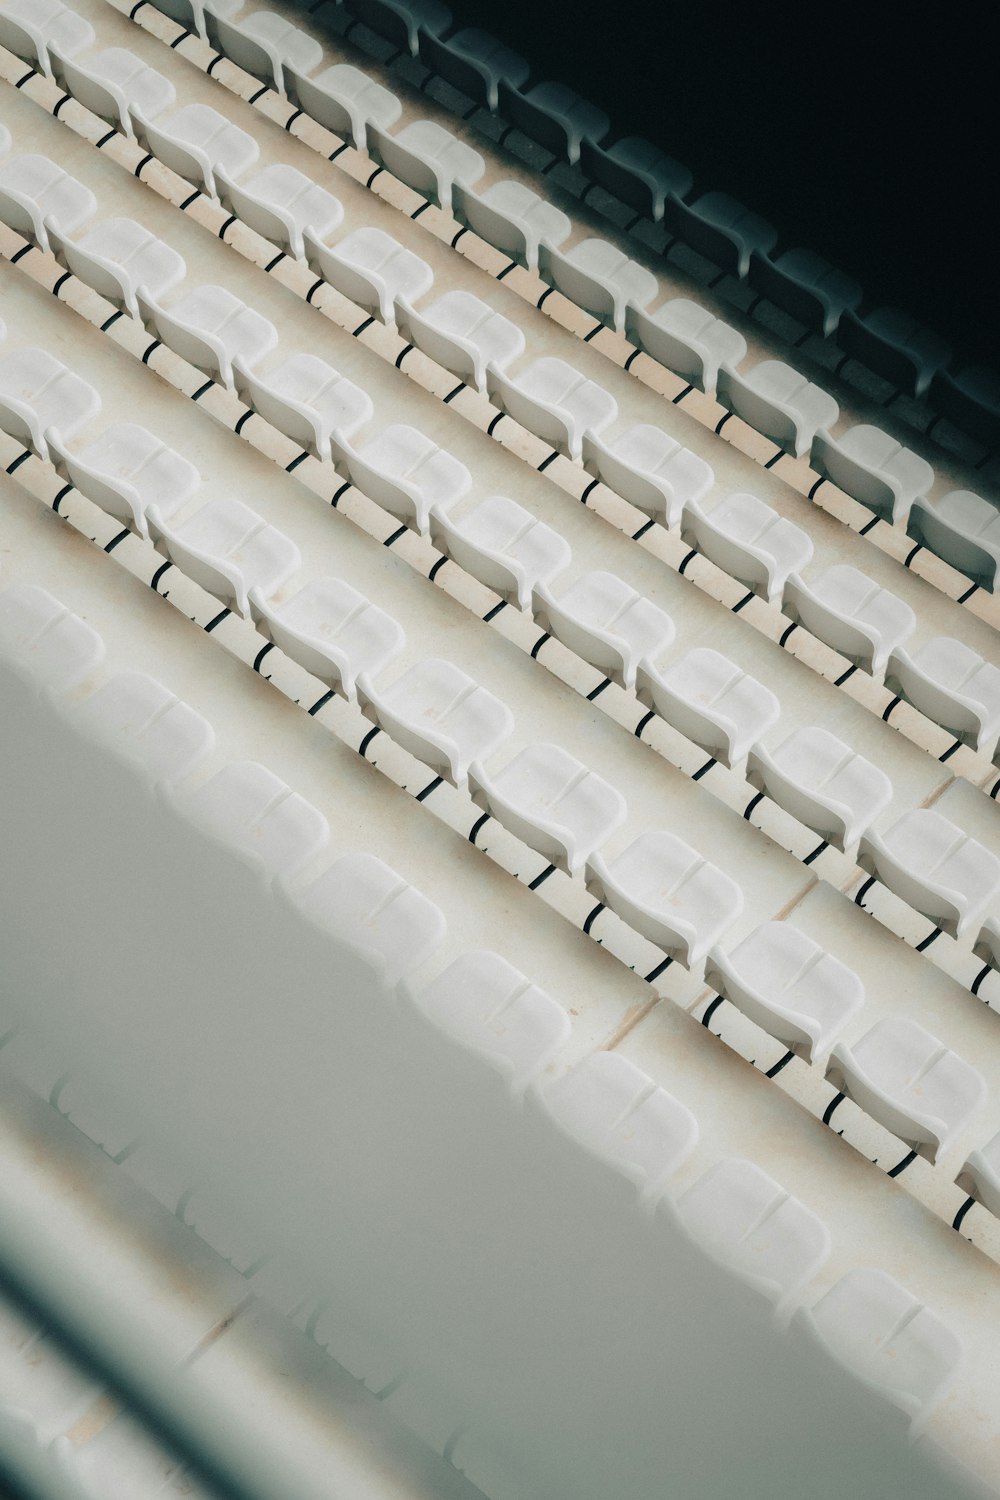 a close up of a computer keyboard on a desk